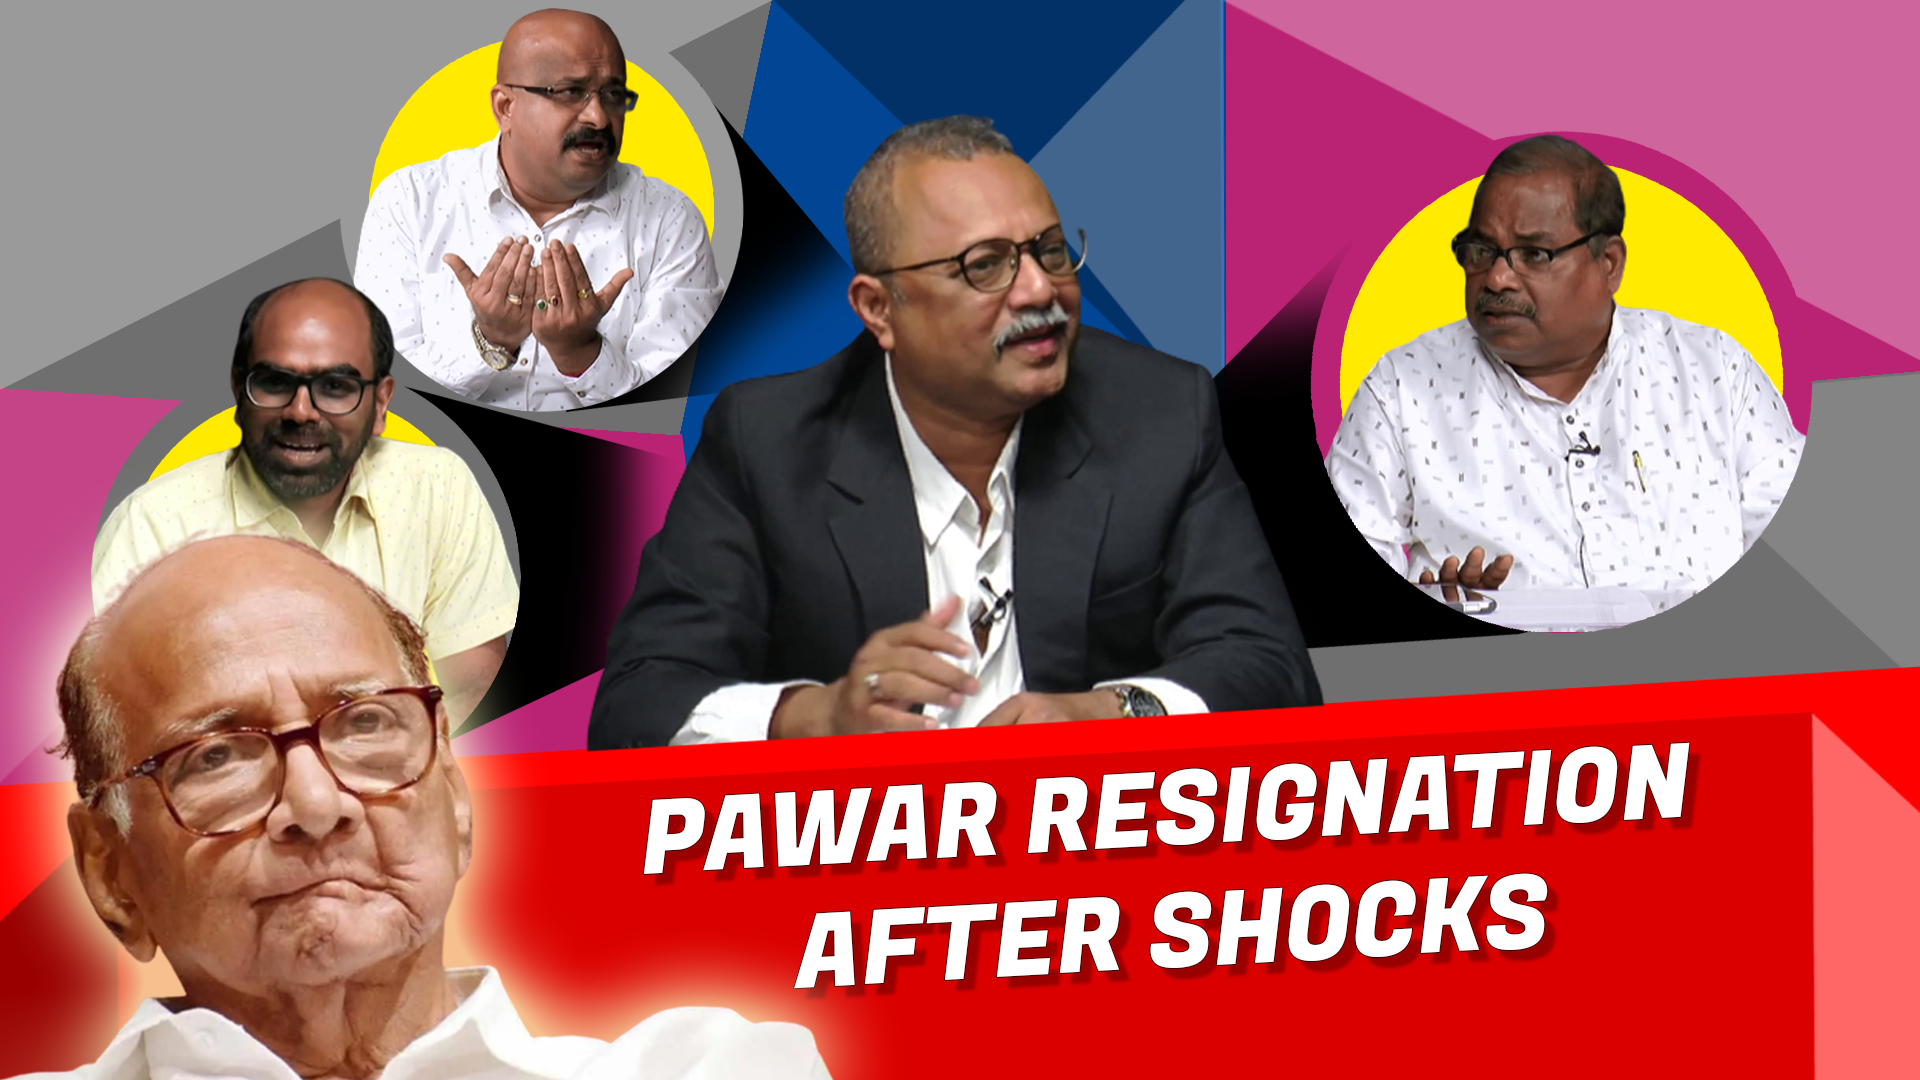 STORY BEHIND THE STORY:  PAWAR RESIGNATION AFTER SHOCKS